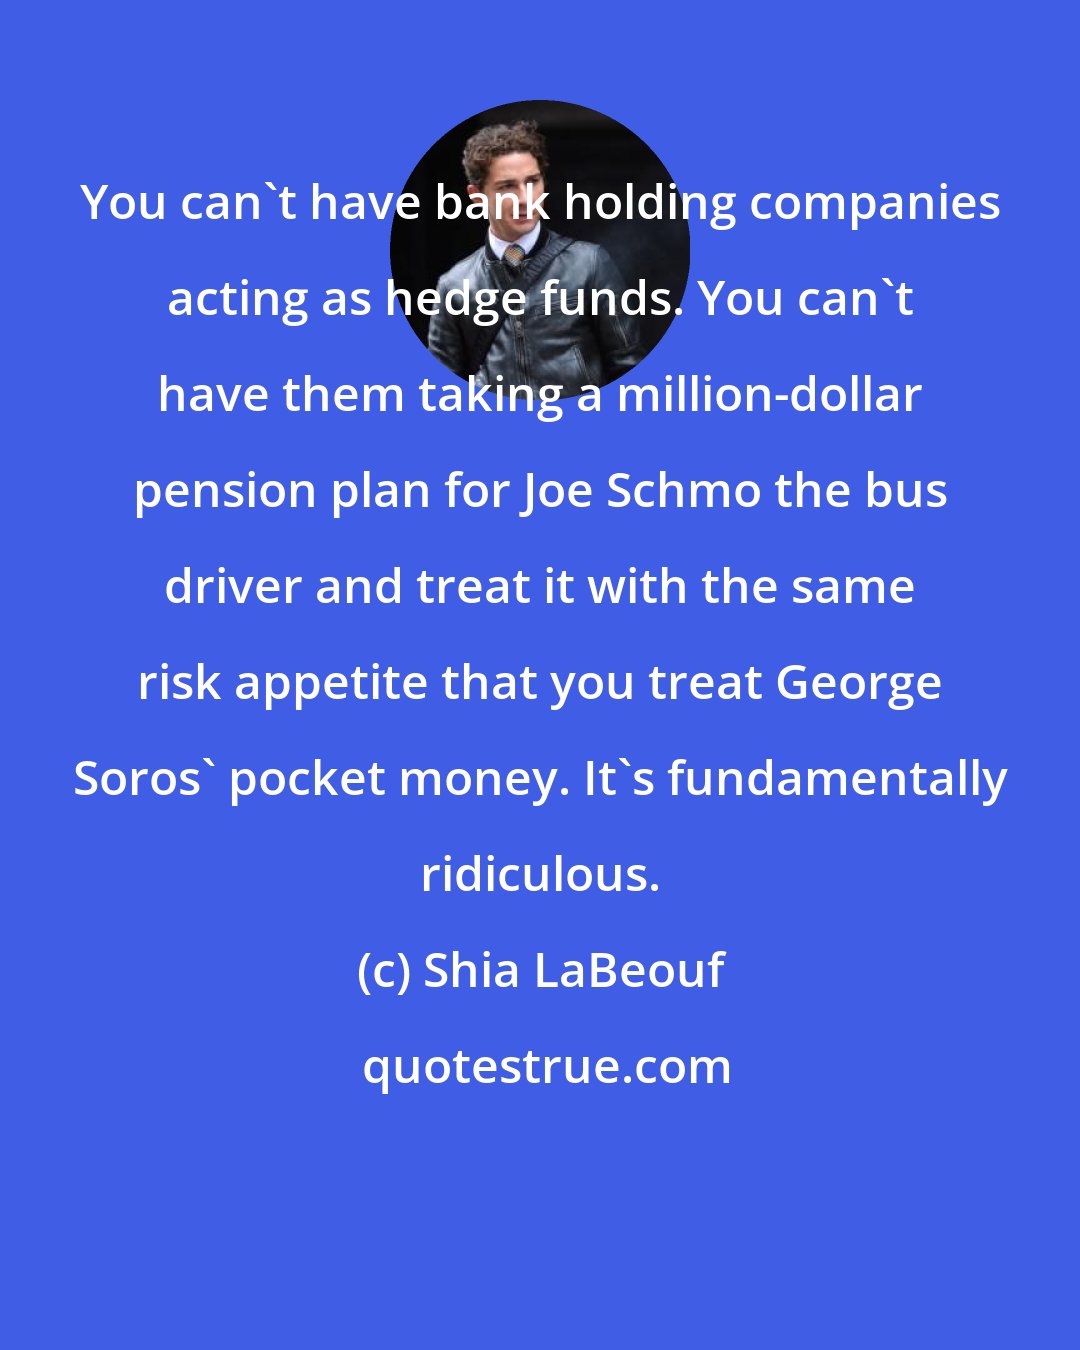 Shia LaBeouf: You can't have bank holding companies acting as hedge funds. You can't have them taking a million-dollar pension plan for Joe Schmo the bus driver and treat it with the same risk appetite that you treat George Soros' pocket money. It's fundamentally ridiculous.